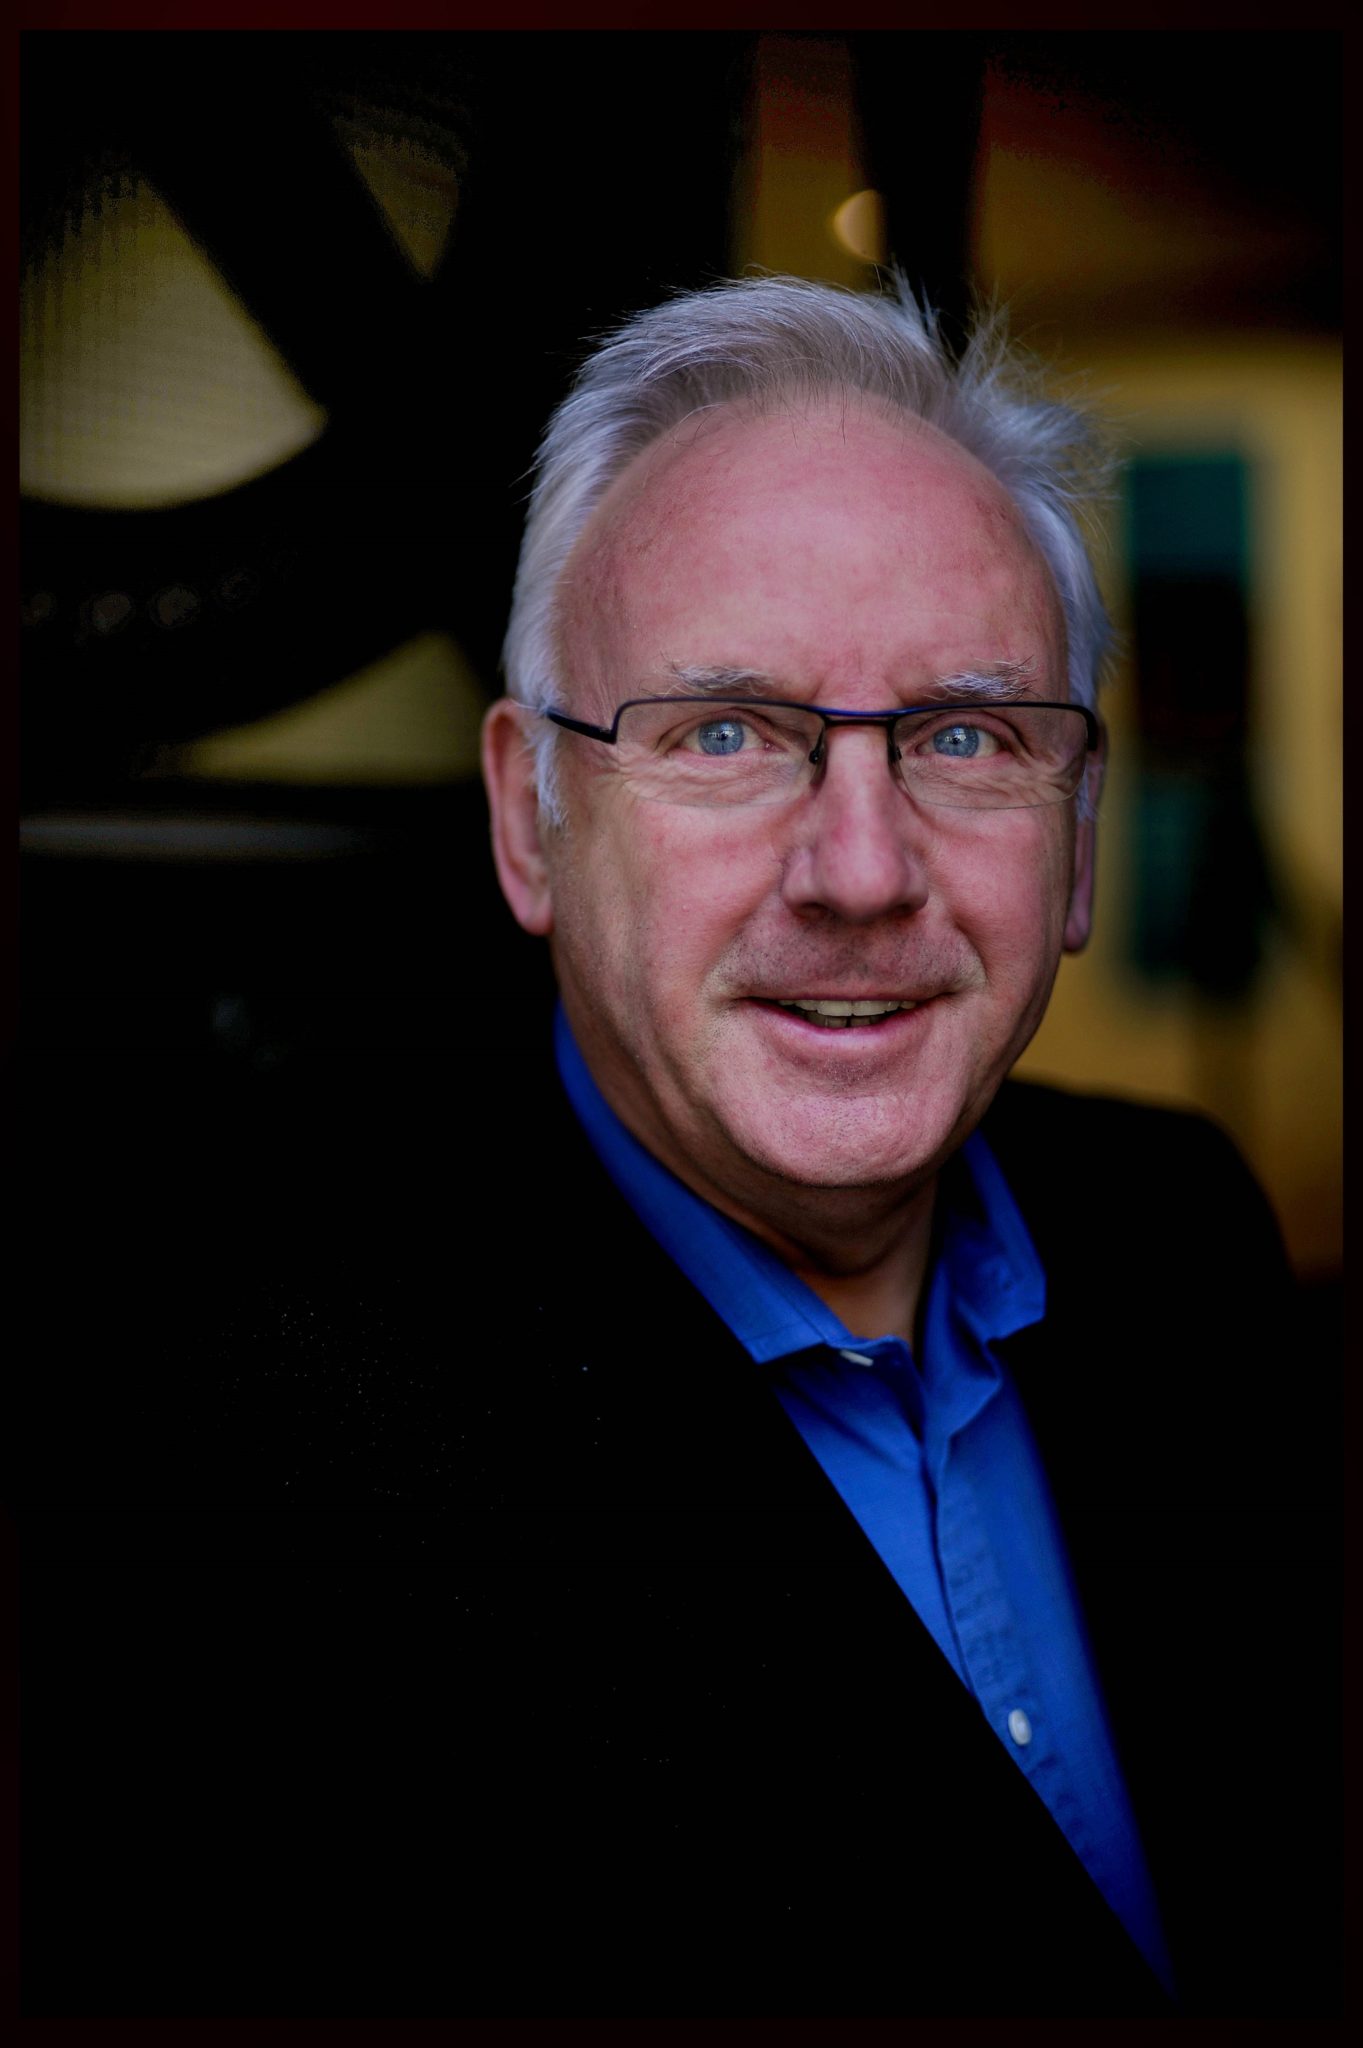 Pete Waterman at The Brindley? We should be so lucky..